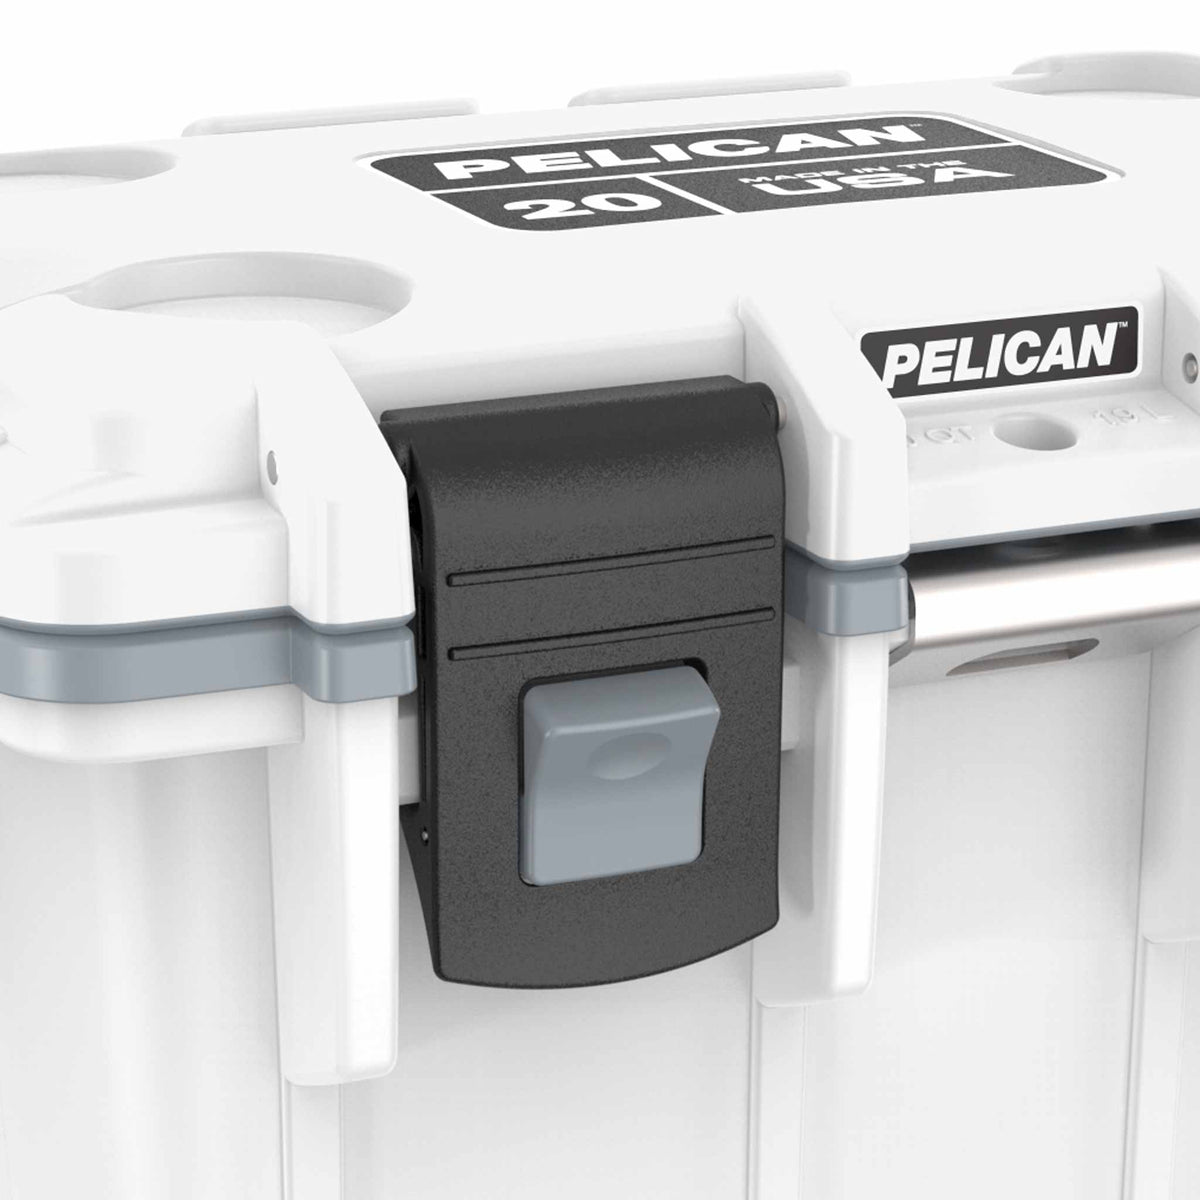 20QT Pelican Elite Cooler has easy to use press &amp; pull latches